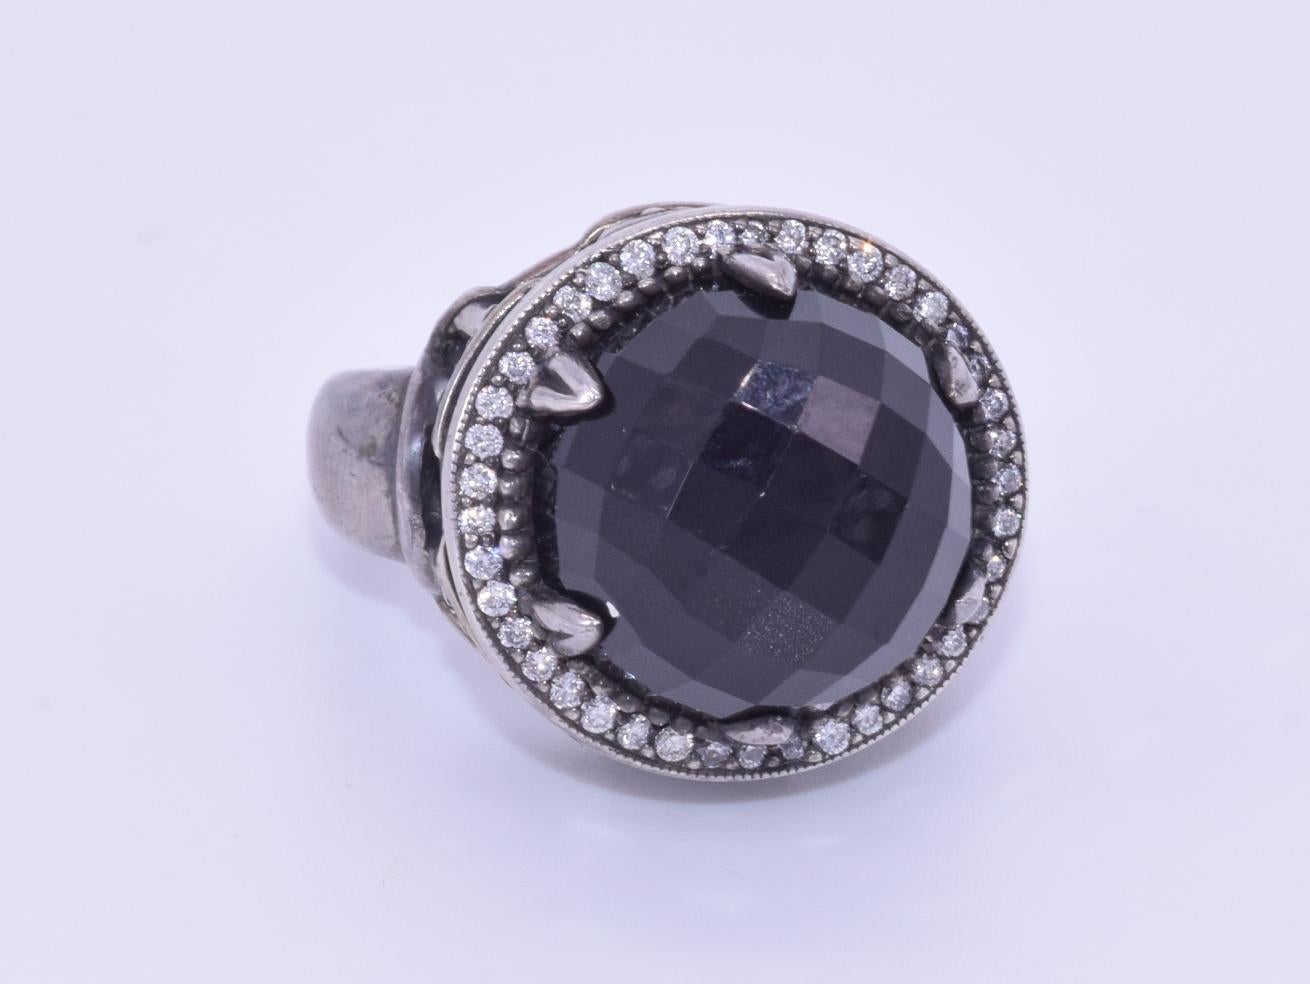 A faceted domed onyx is set in a surround of round diamonds totaling approximately 0.41 carat mounted in blackened silver in an architectural inspired ring by designer Faith Ann Kiely. Ring size 6.75.